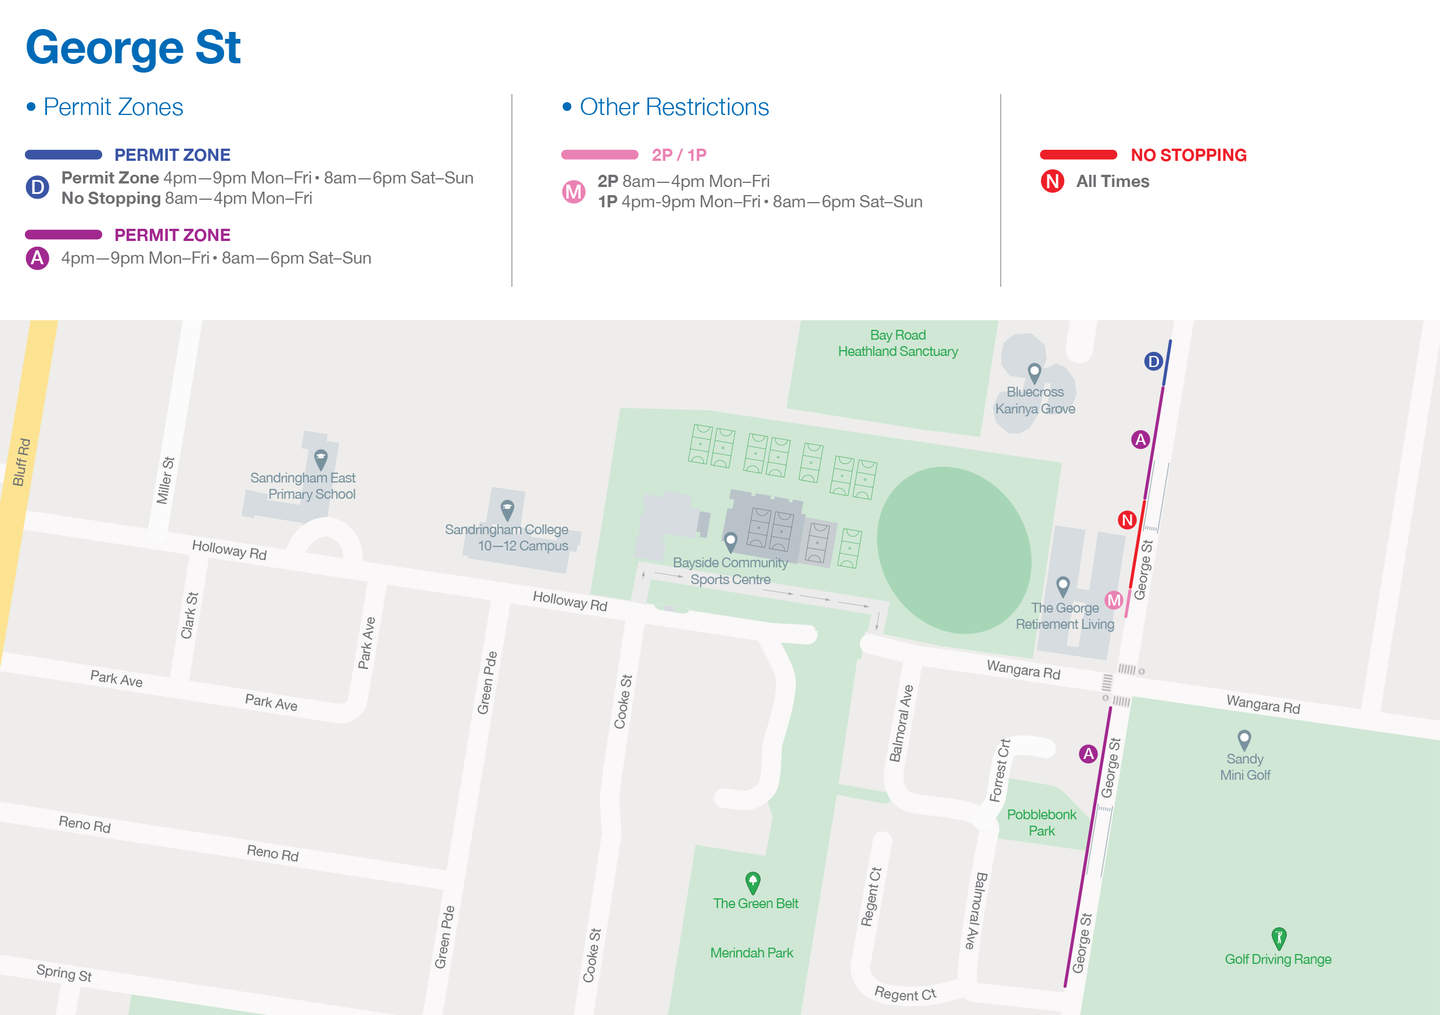 Netball Centre parking restrictions on George Street